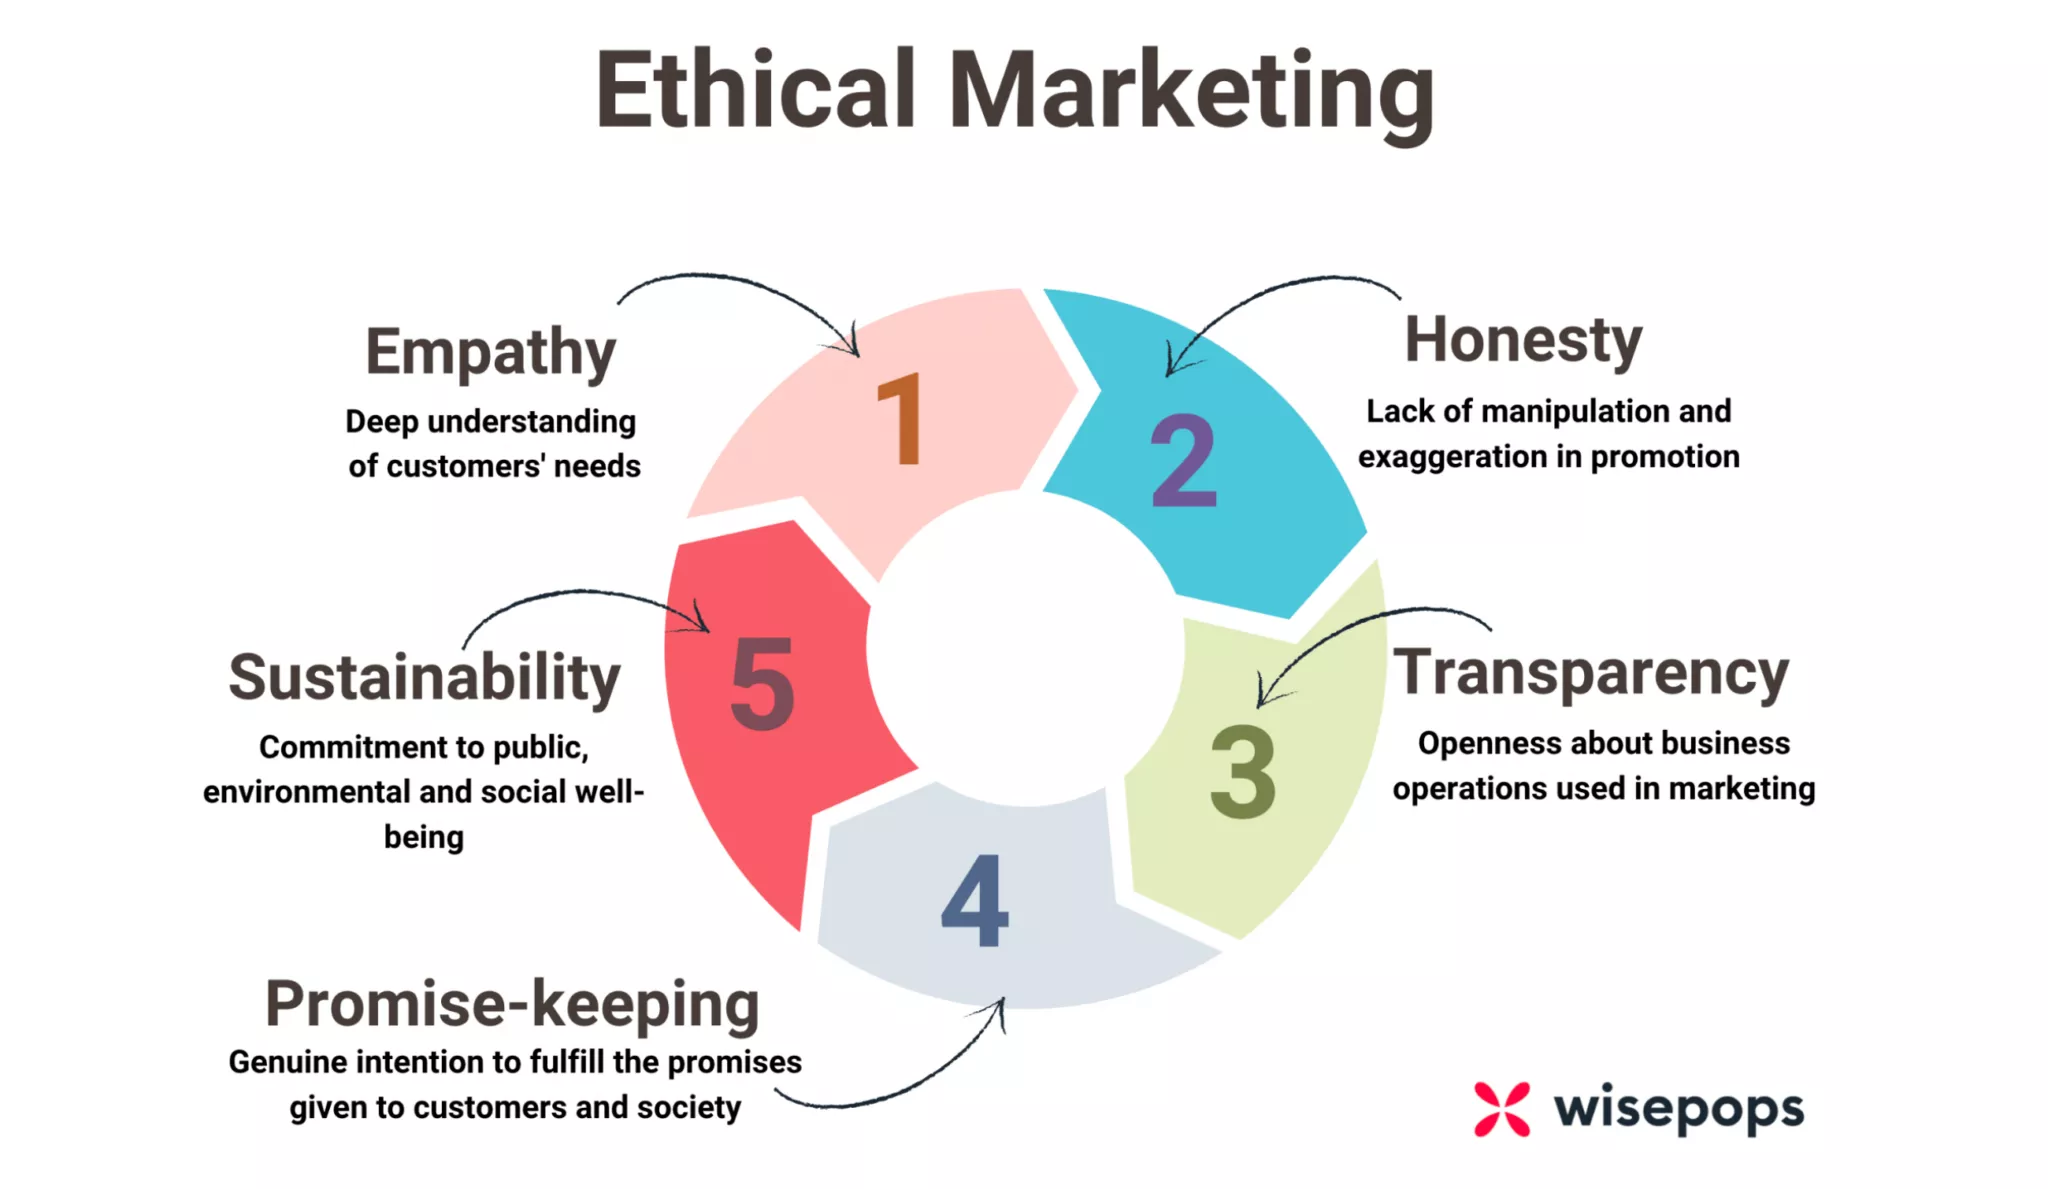 Empathetic, Ethical Marketing - How to Get it Right